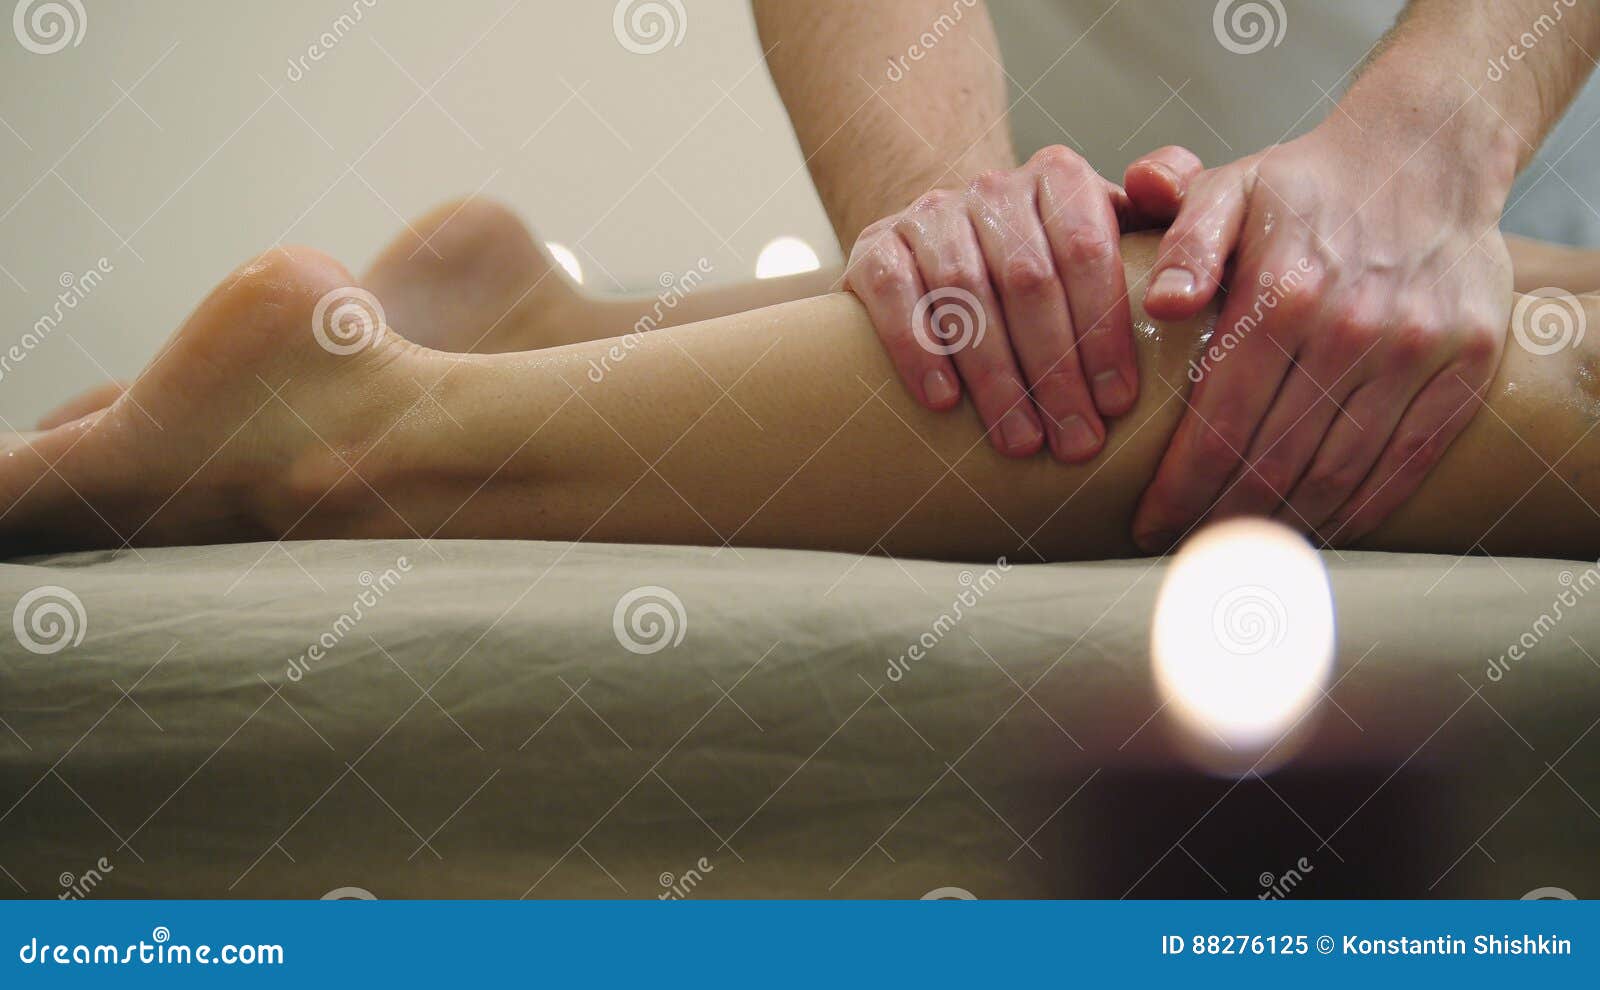 sesame oil massage for calf muscle. relaxation treatment for young female, close up